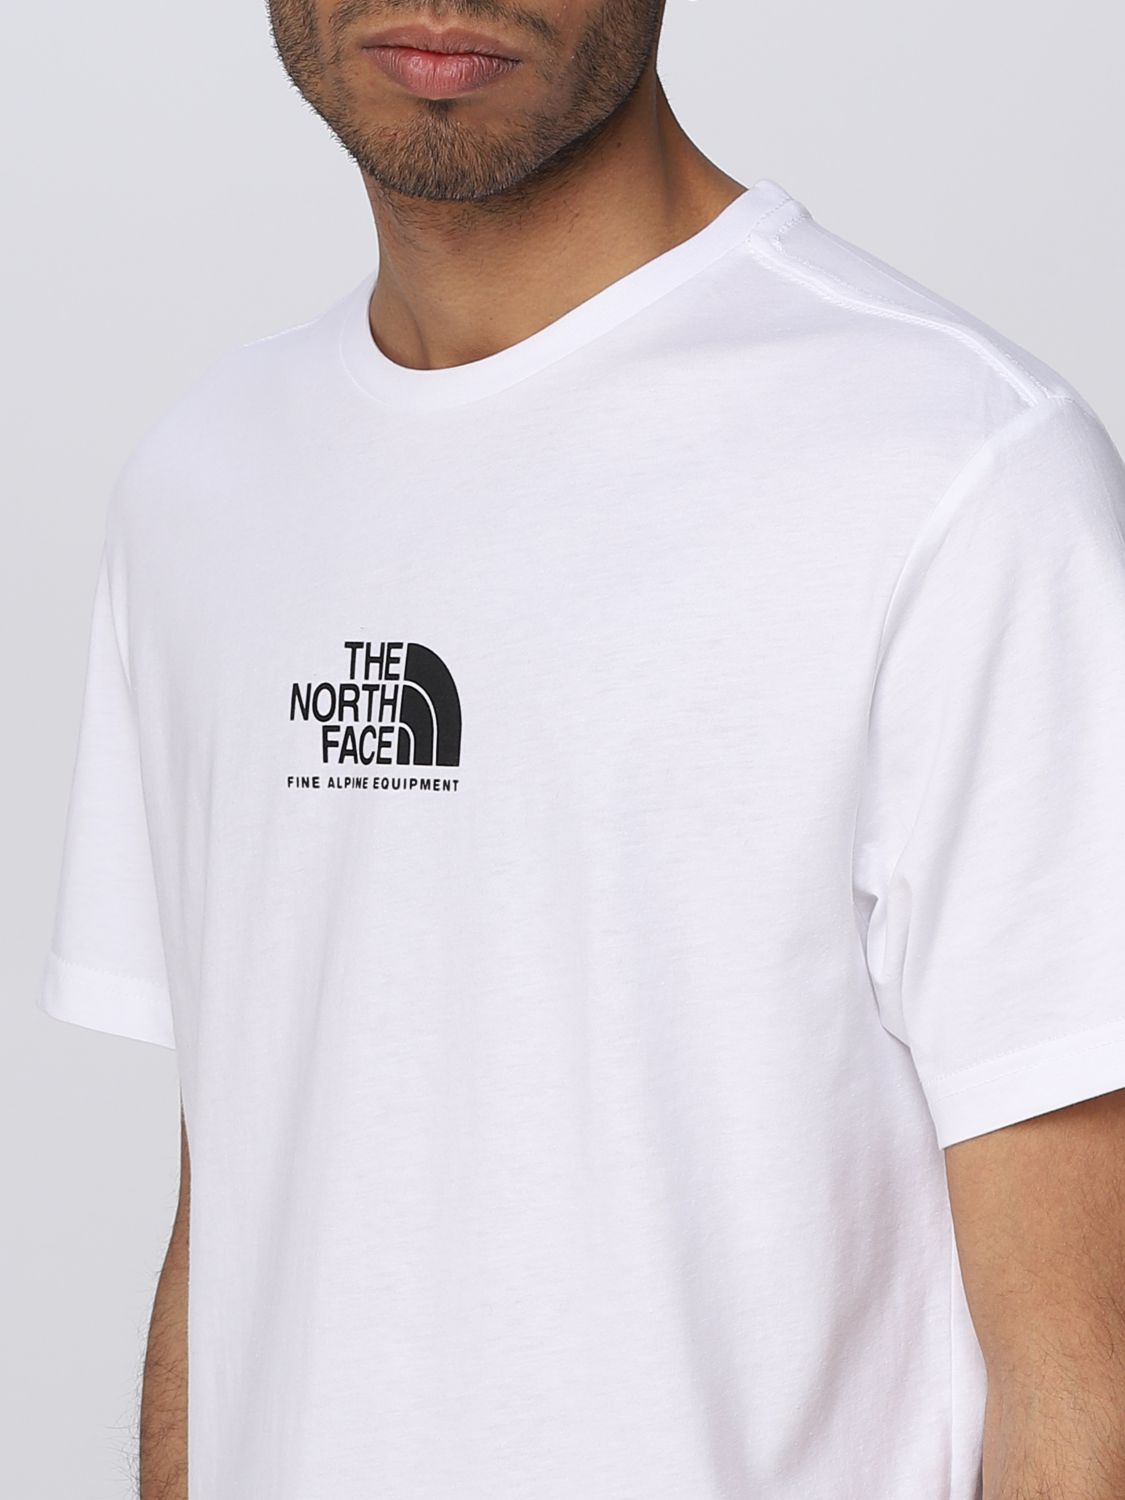 T-Shirt The North Face: The North Face Herren T-Shirt weiß 4